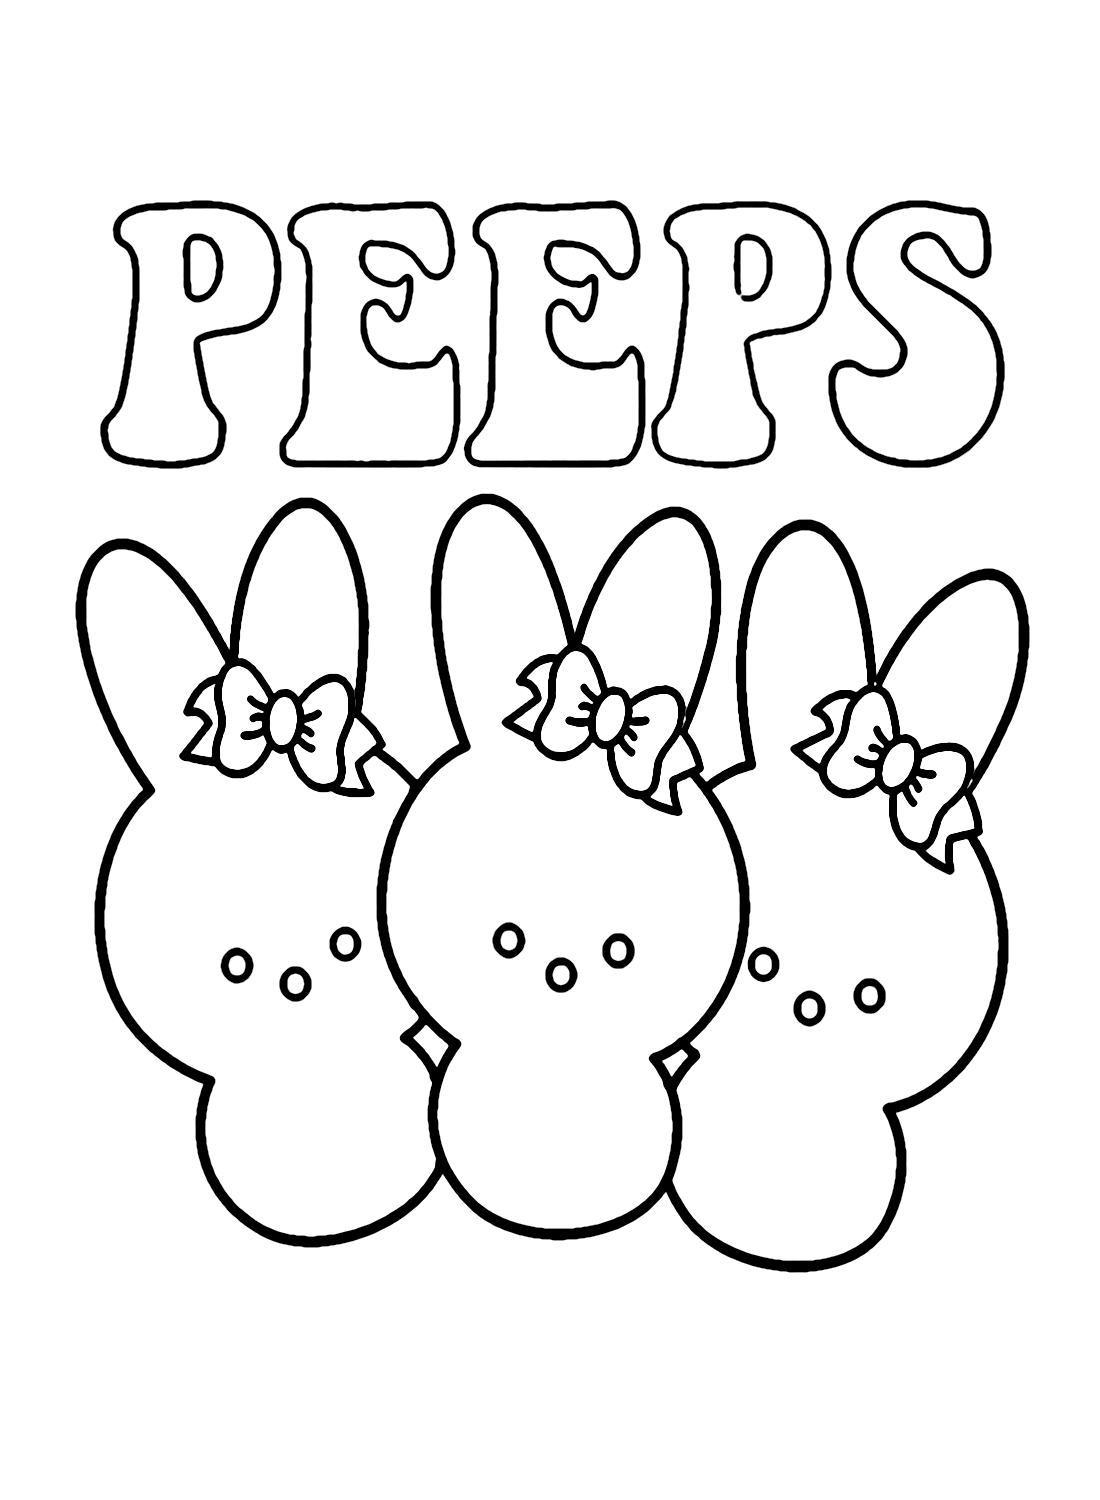 Peeps coloring pages printable for free download